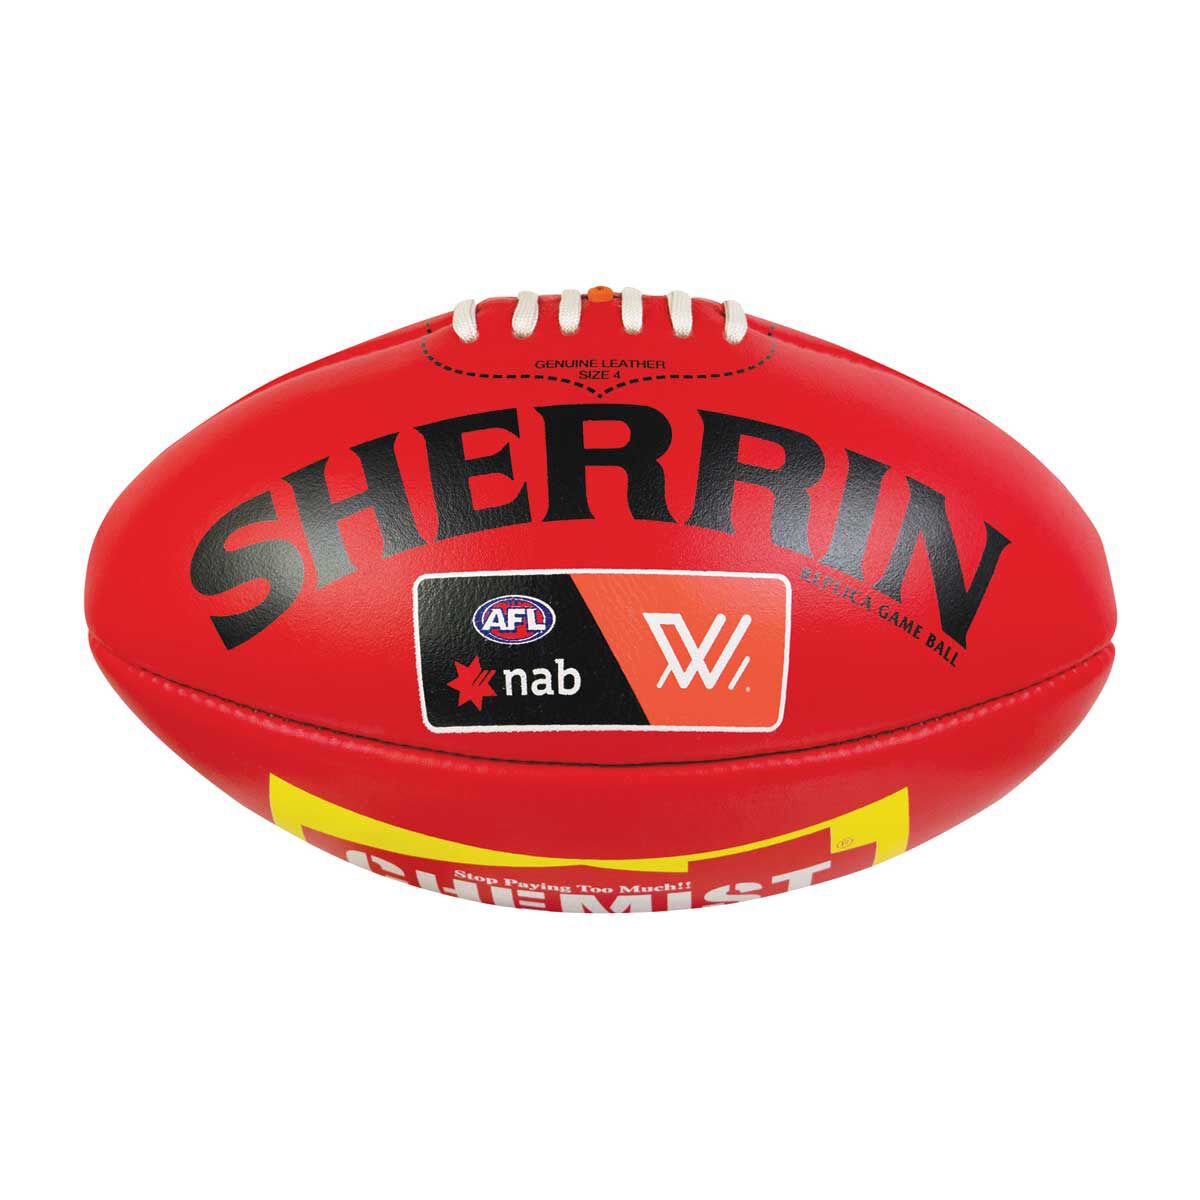 Sherrin AFLW Replica League Football Leather Ball In Grey Size 4 